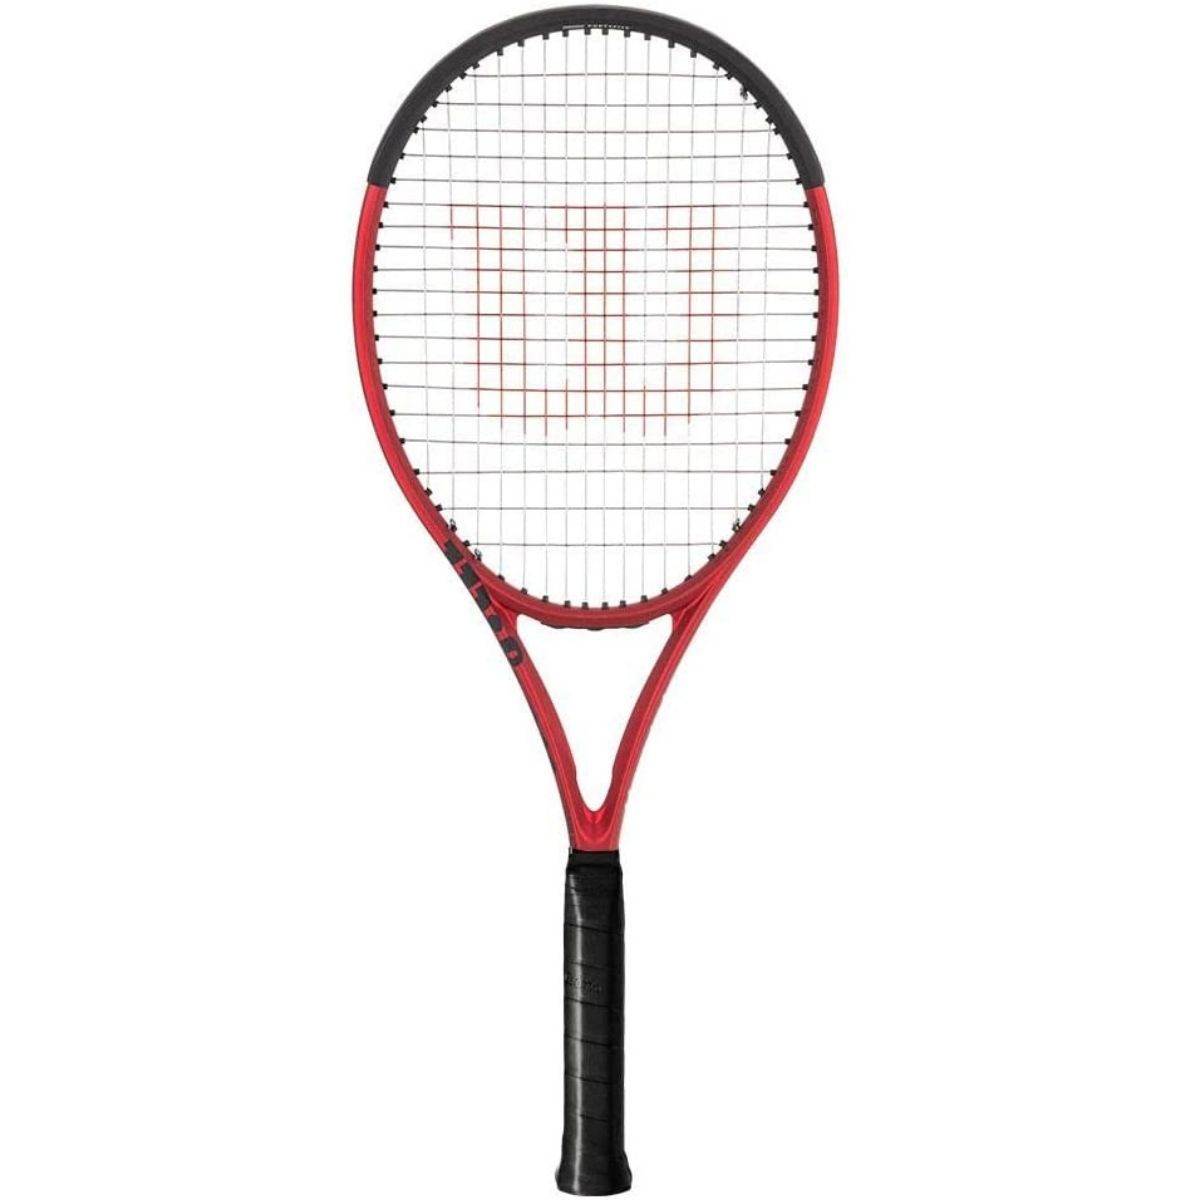 The Best Tennis Rackets for Intermediate Players Options: Wilson Clash 100